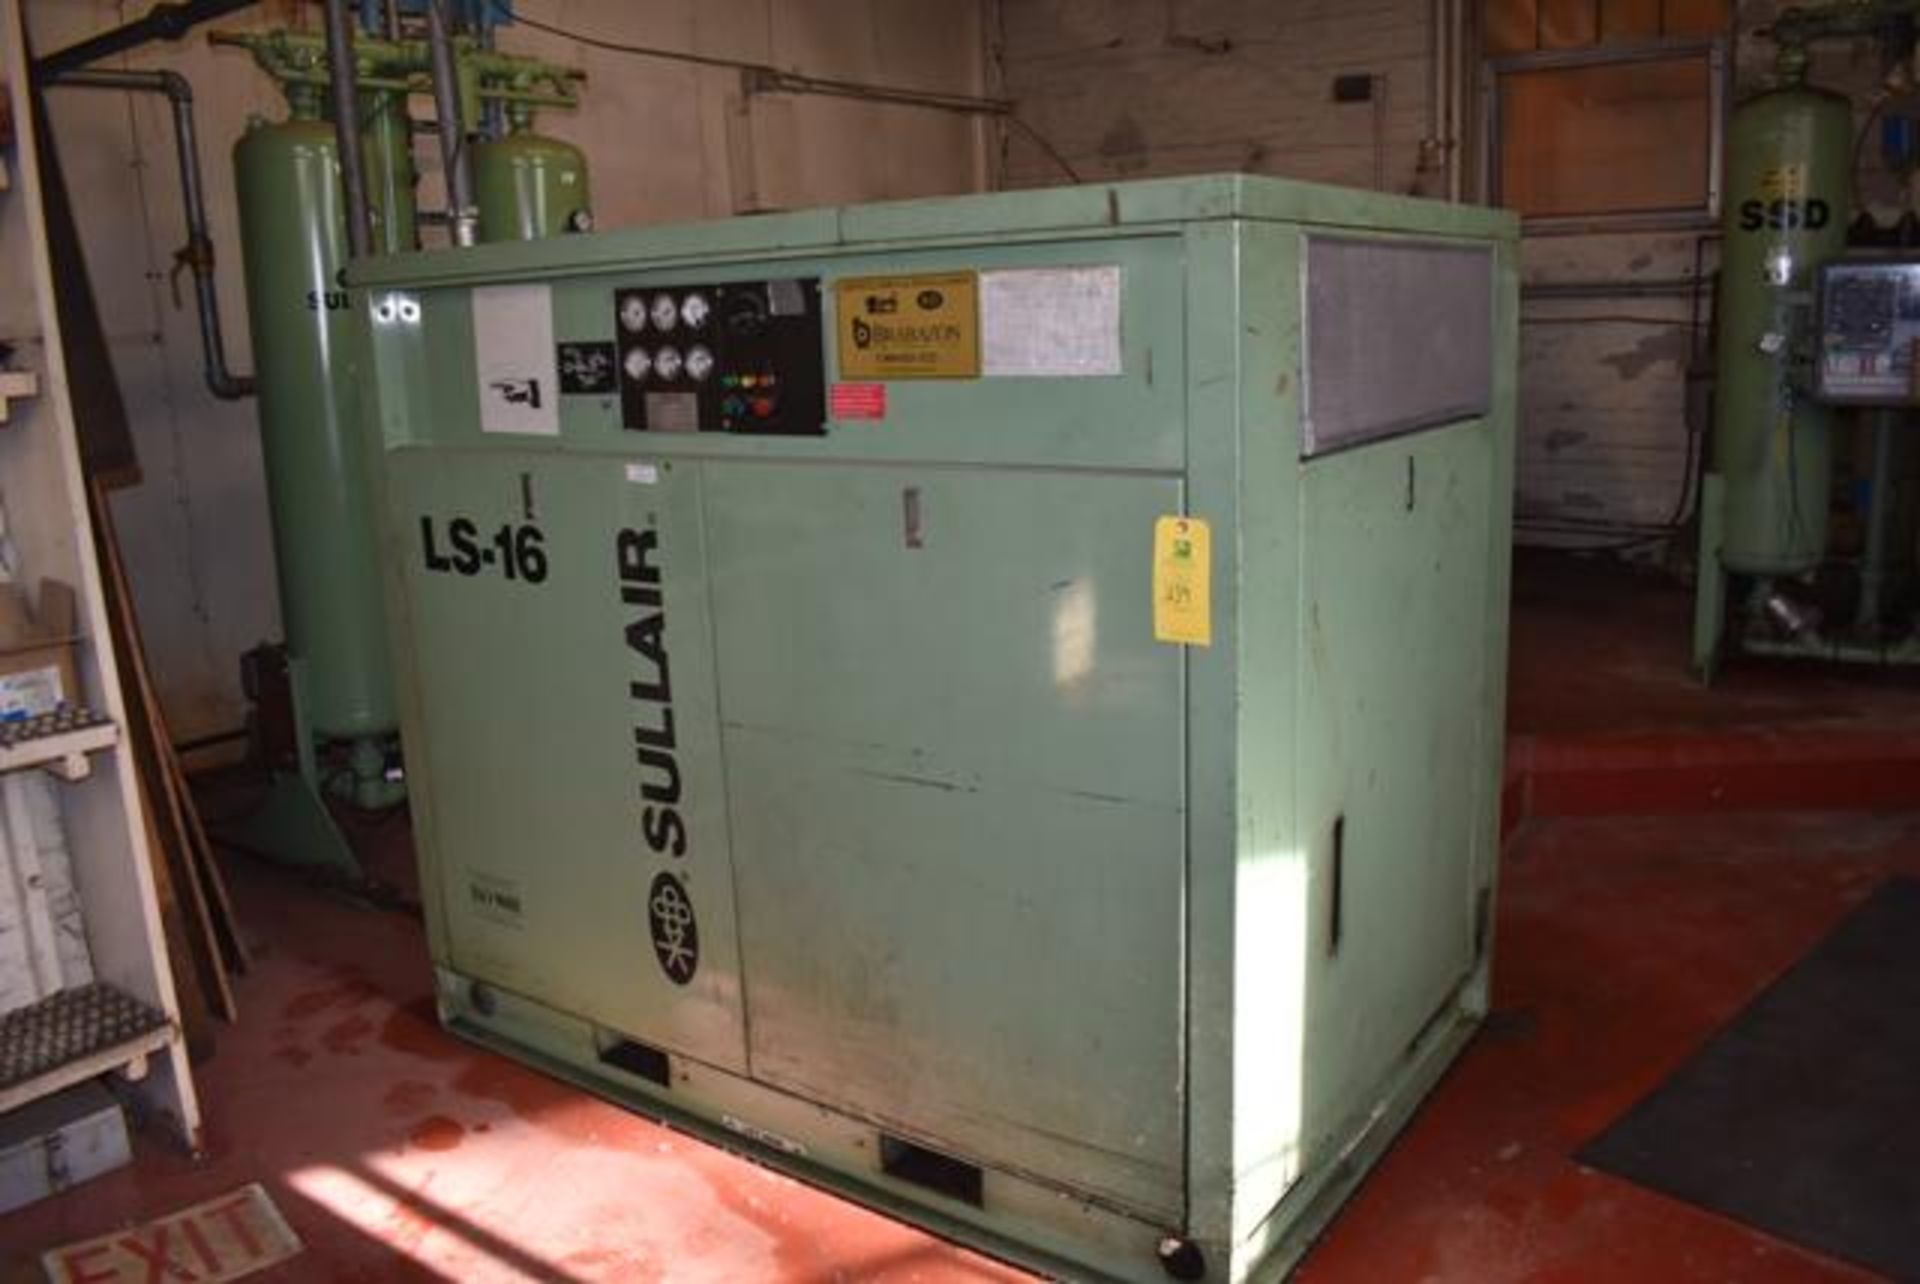 Sullair Model #LS-16 Rotary Screw Air Compressor, 75 HP Motor, 81329 Hrs. Indicated